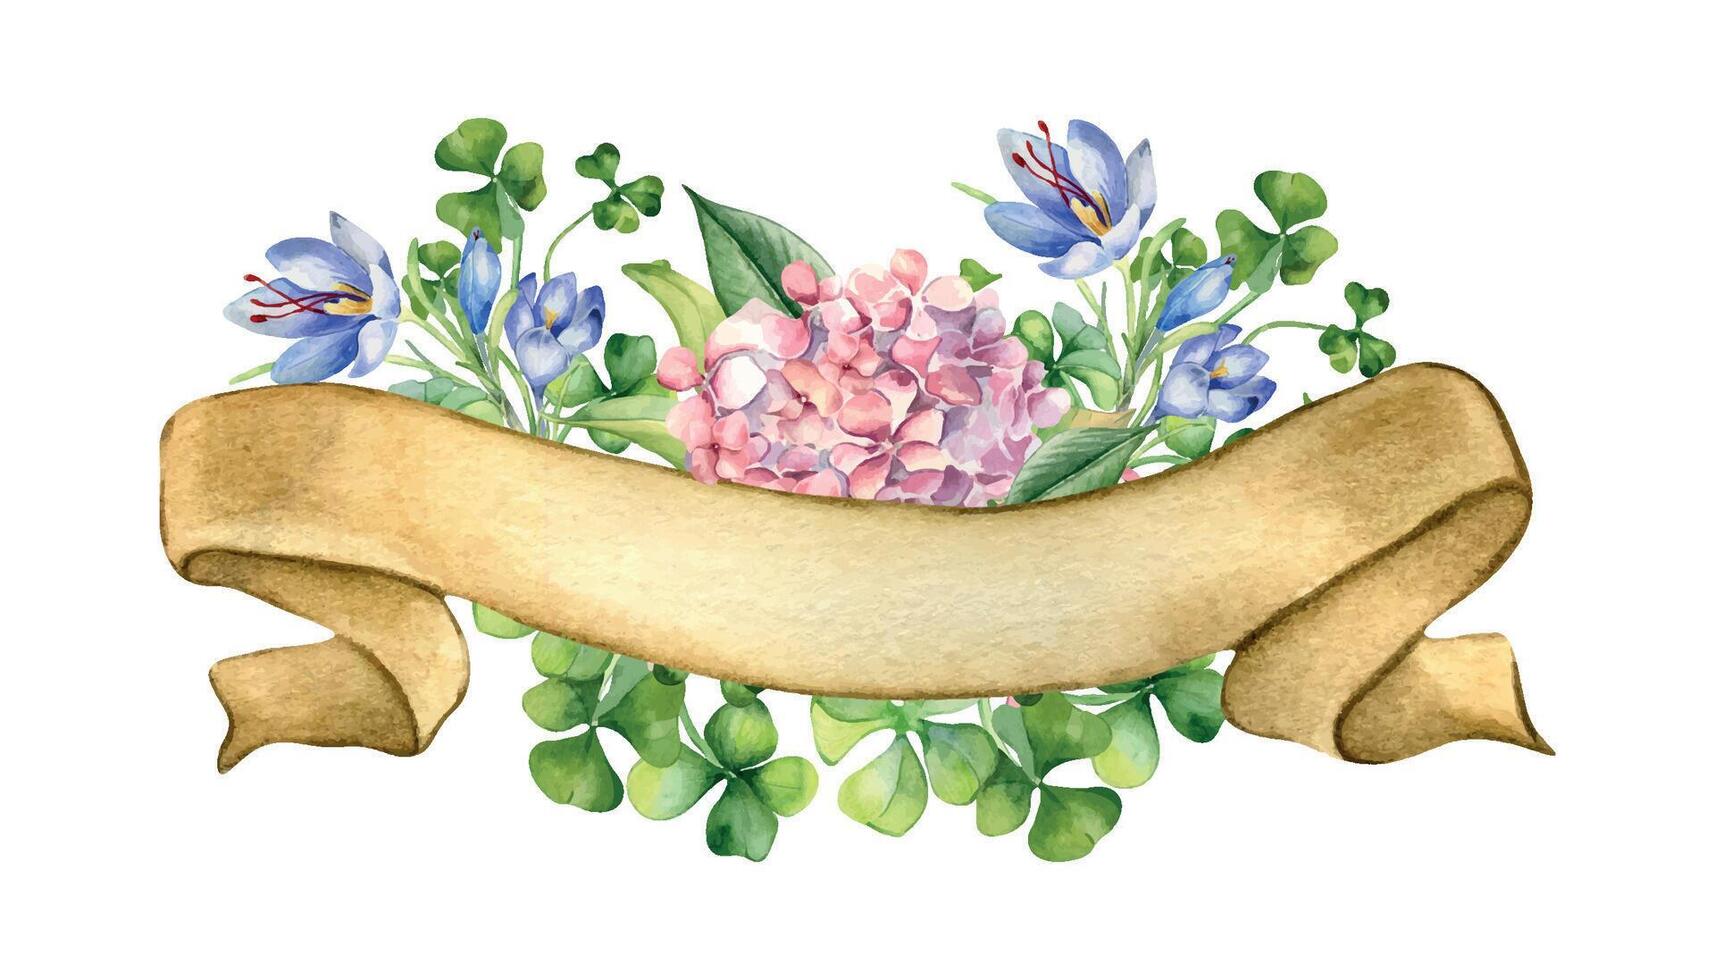 Ribbon banner with shamrock and spring flowers watercolor illustration isolated on white. Painted clover, crocus flowers. Happy Birthday ribbon material. For St.Patricks day, Easter, mother day vector